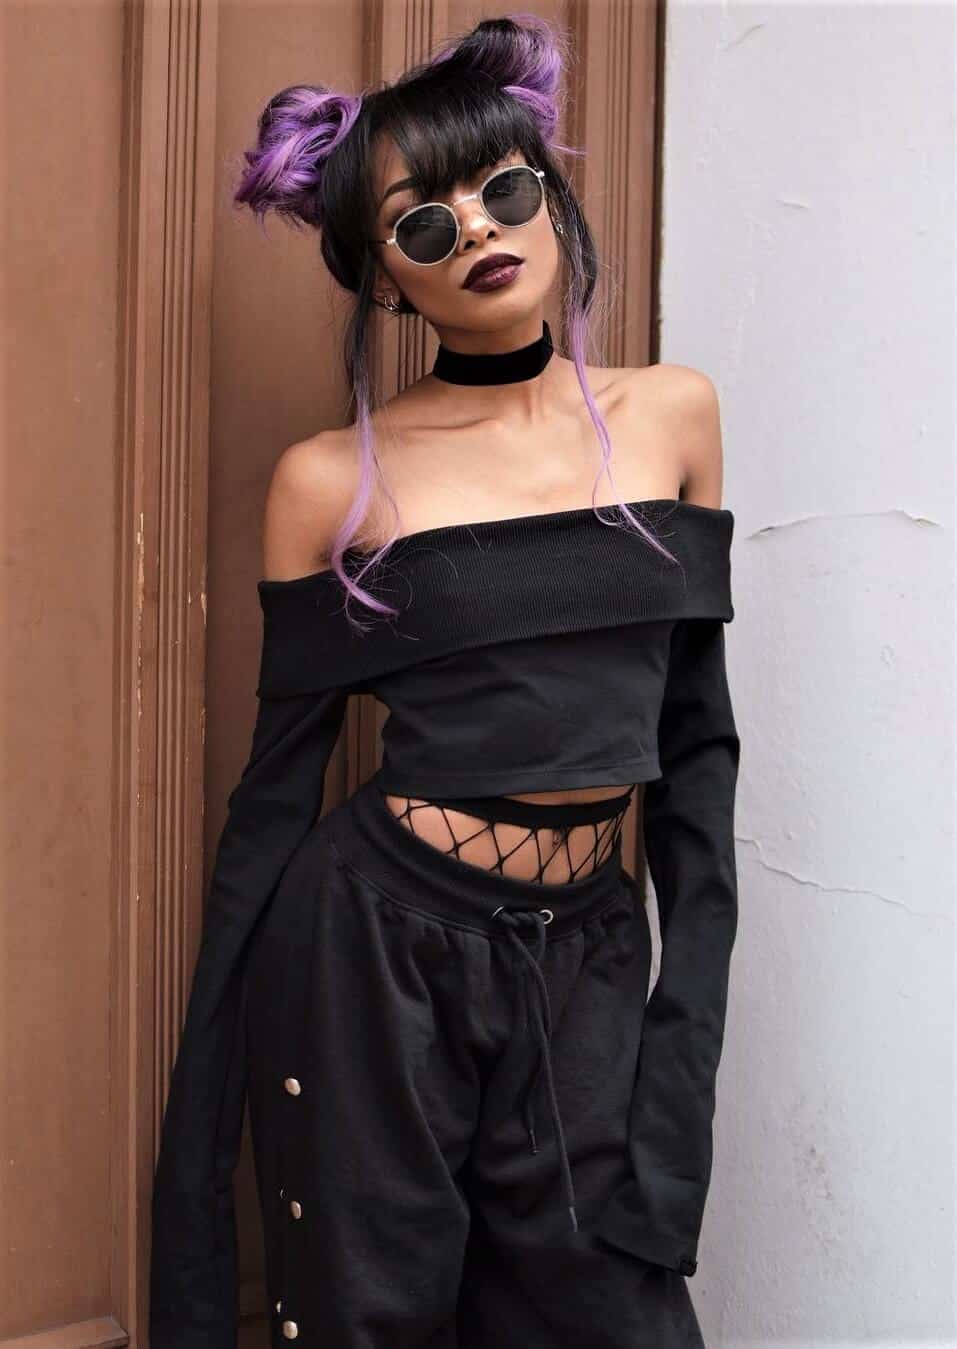 Bold choker necklace with sunglasses, off-the-shoulder black top, fishnet tights & active pants by nyanelebajoa